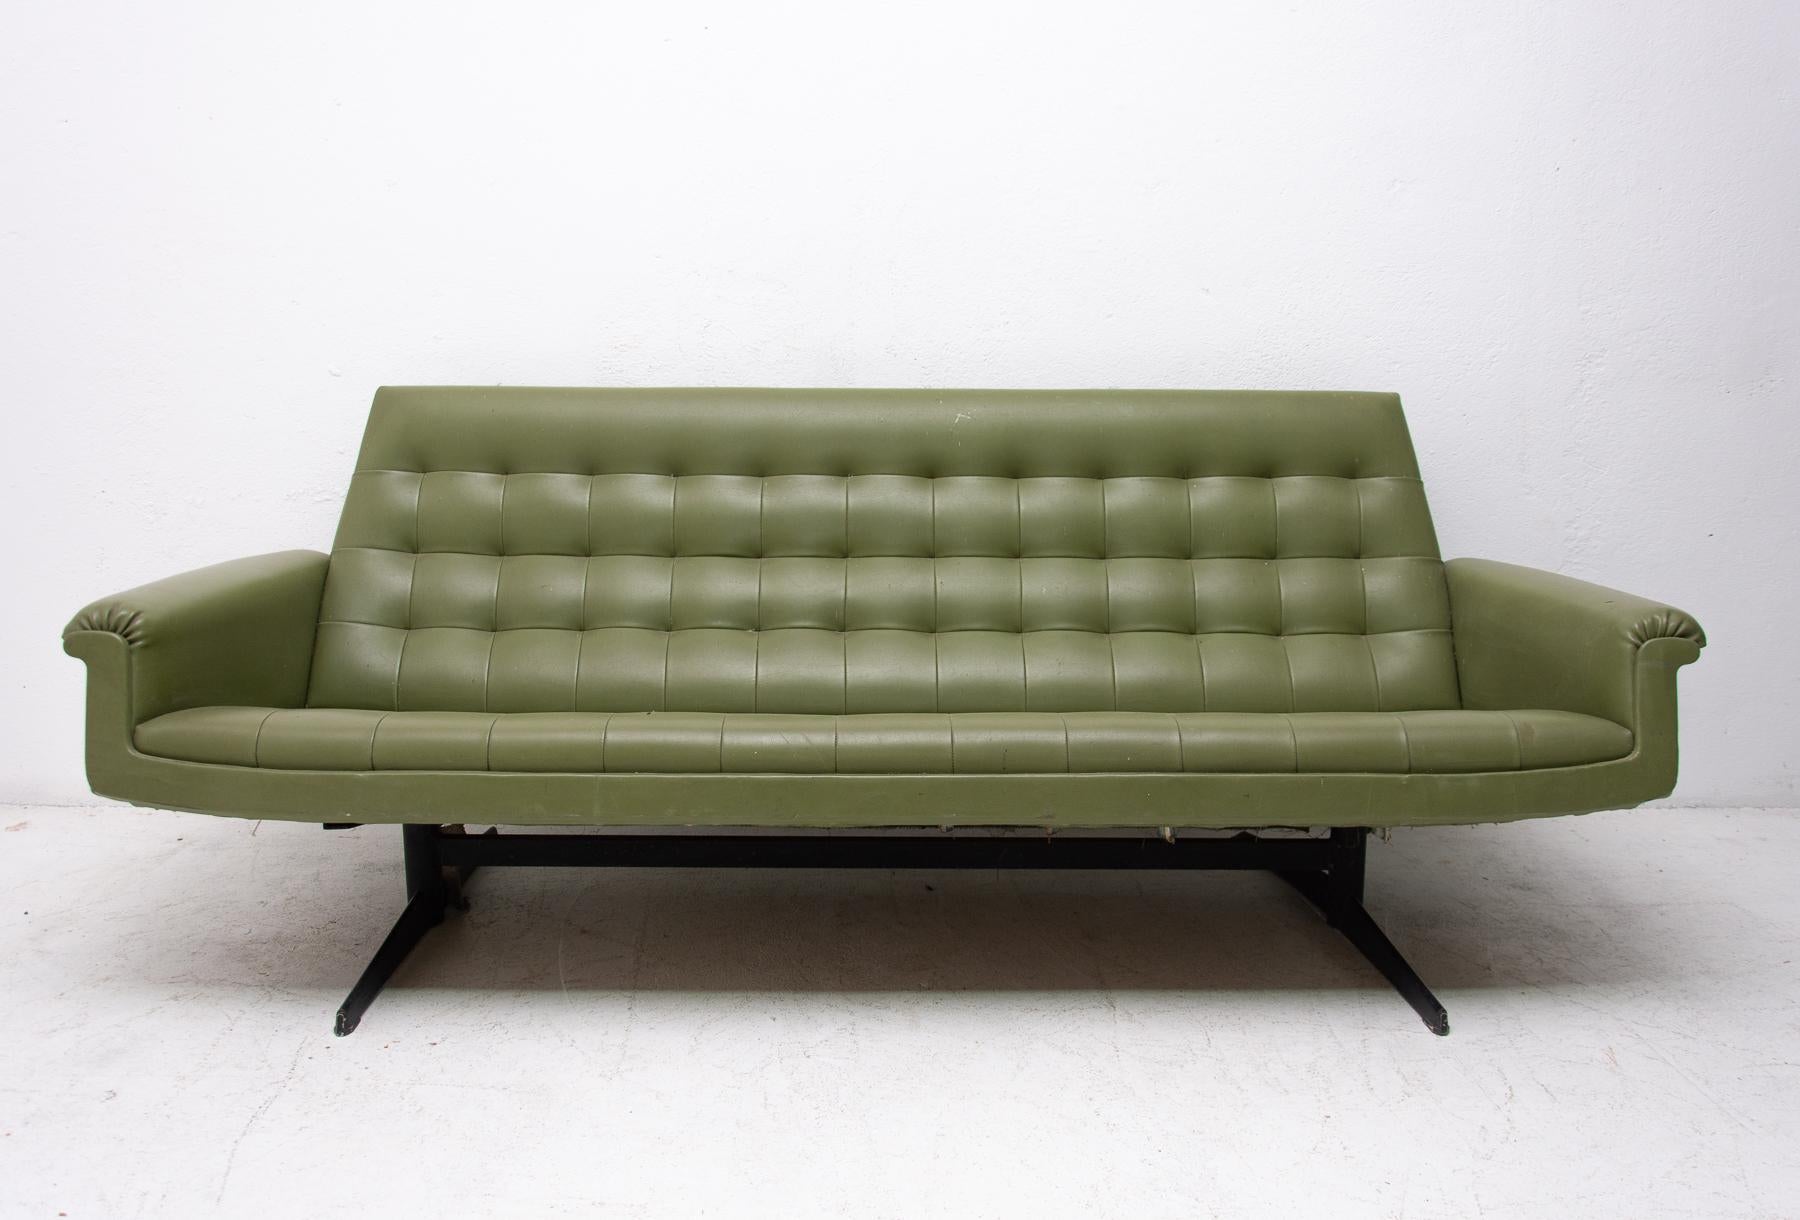 This sofa was made in the former Czechoslovakia in the 1970 as a part of living room set consists of one sofa, pair of swivel armchairs and stool. The sofa is upholstered with green leatherette. The legs are made from iron. One leg is slightly bent